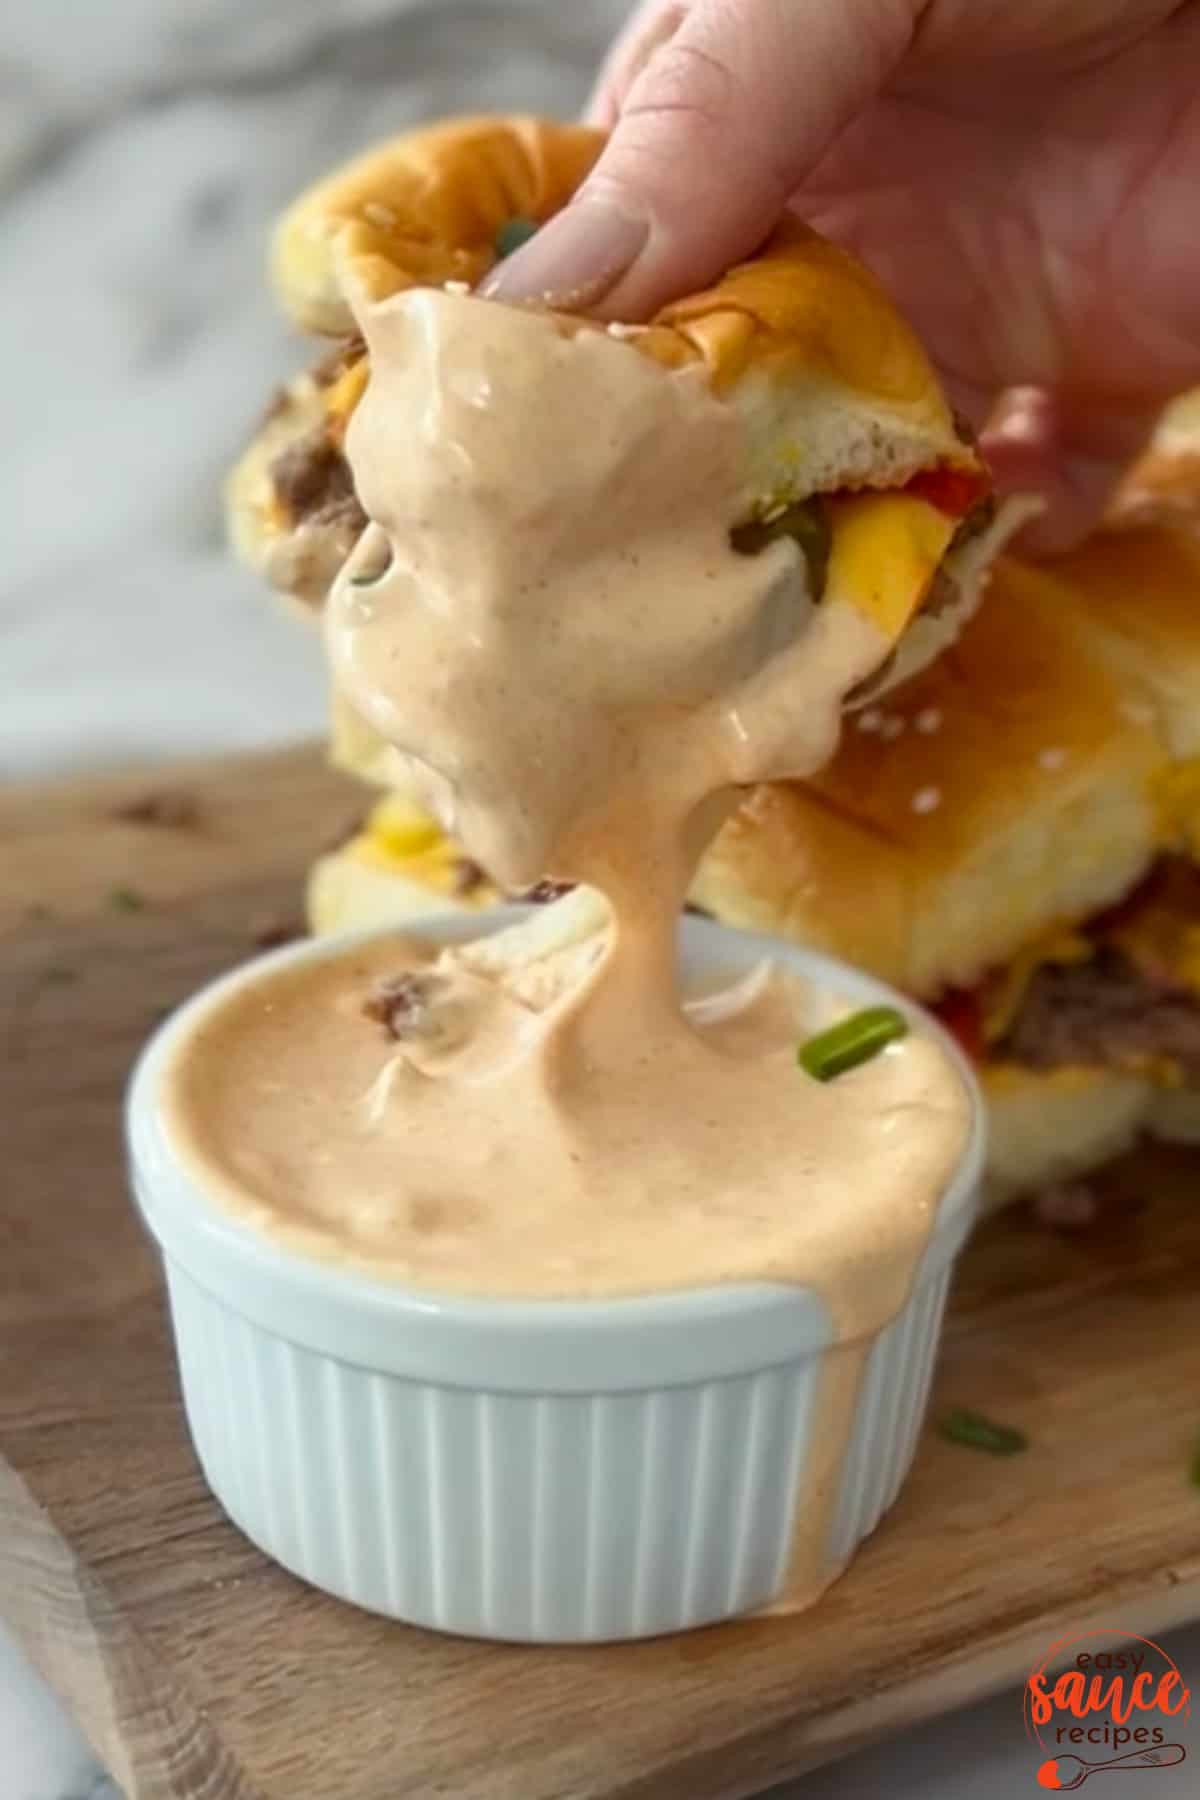 burger dipping into burger sauce in a white dish